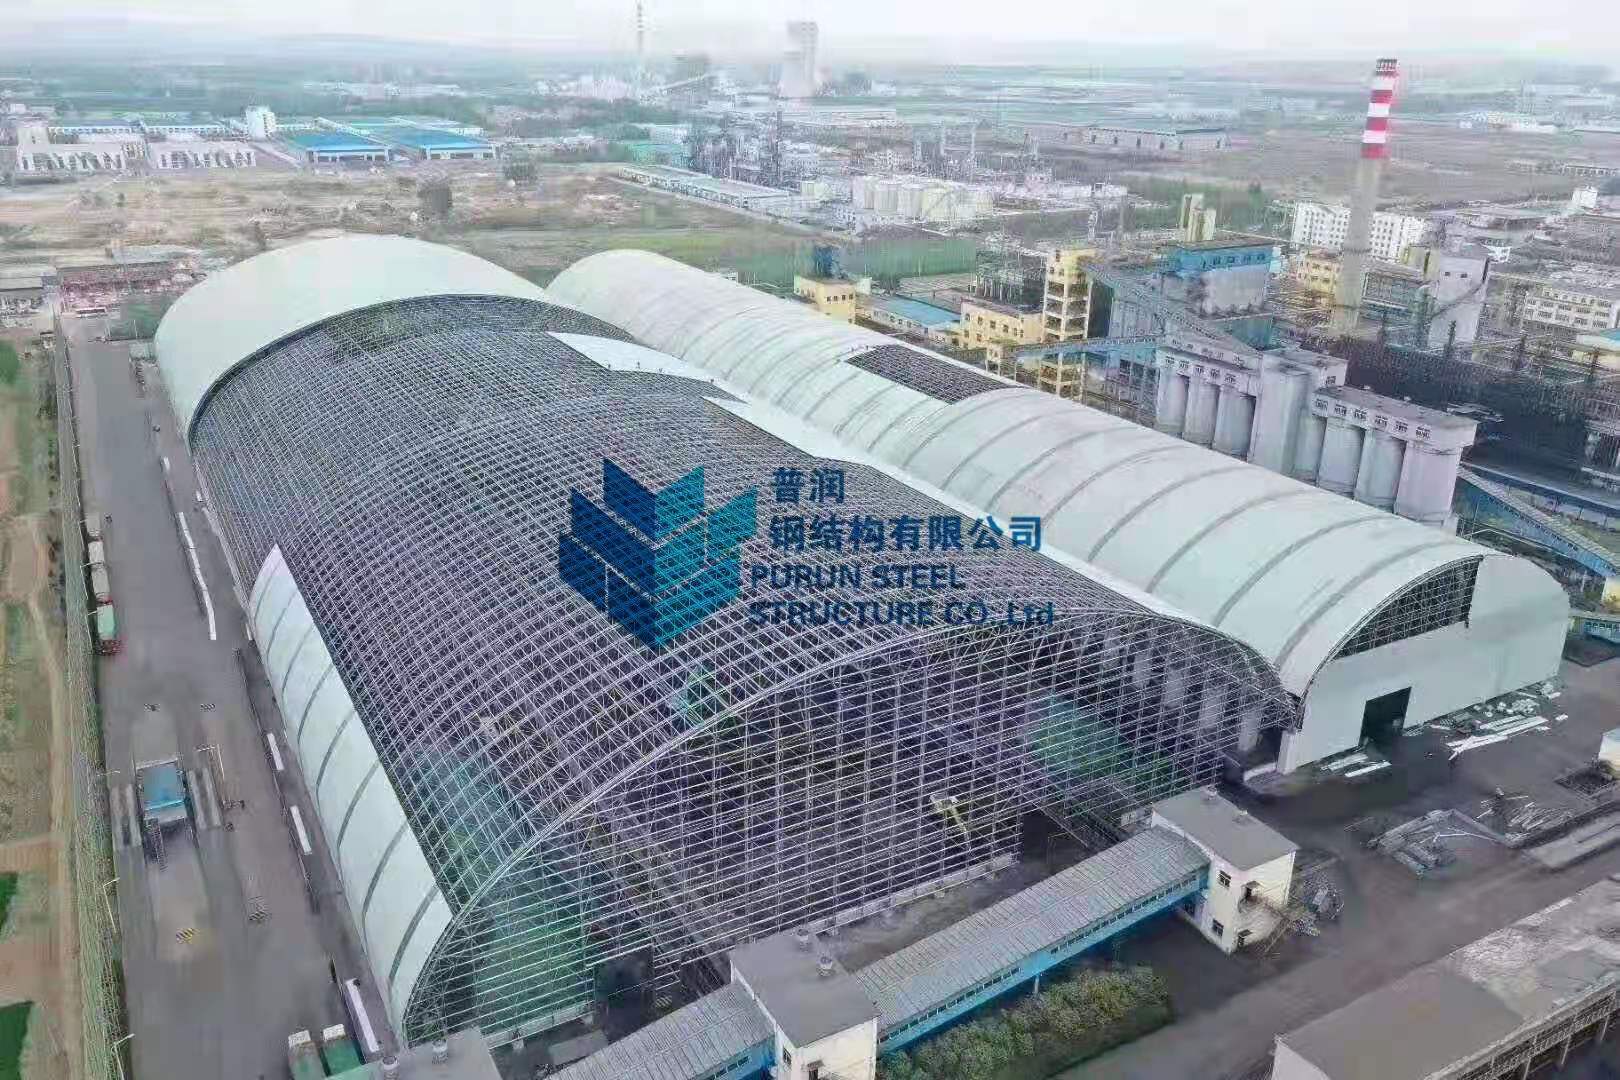 Space frame industrial duplex coal storage shed project. The total length is 700 meters, the total span is 188 meters, the total height is 57 meters, the construction time is 90 days, and the construction personnel are 37 people. 